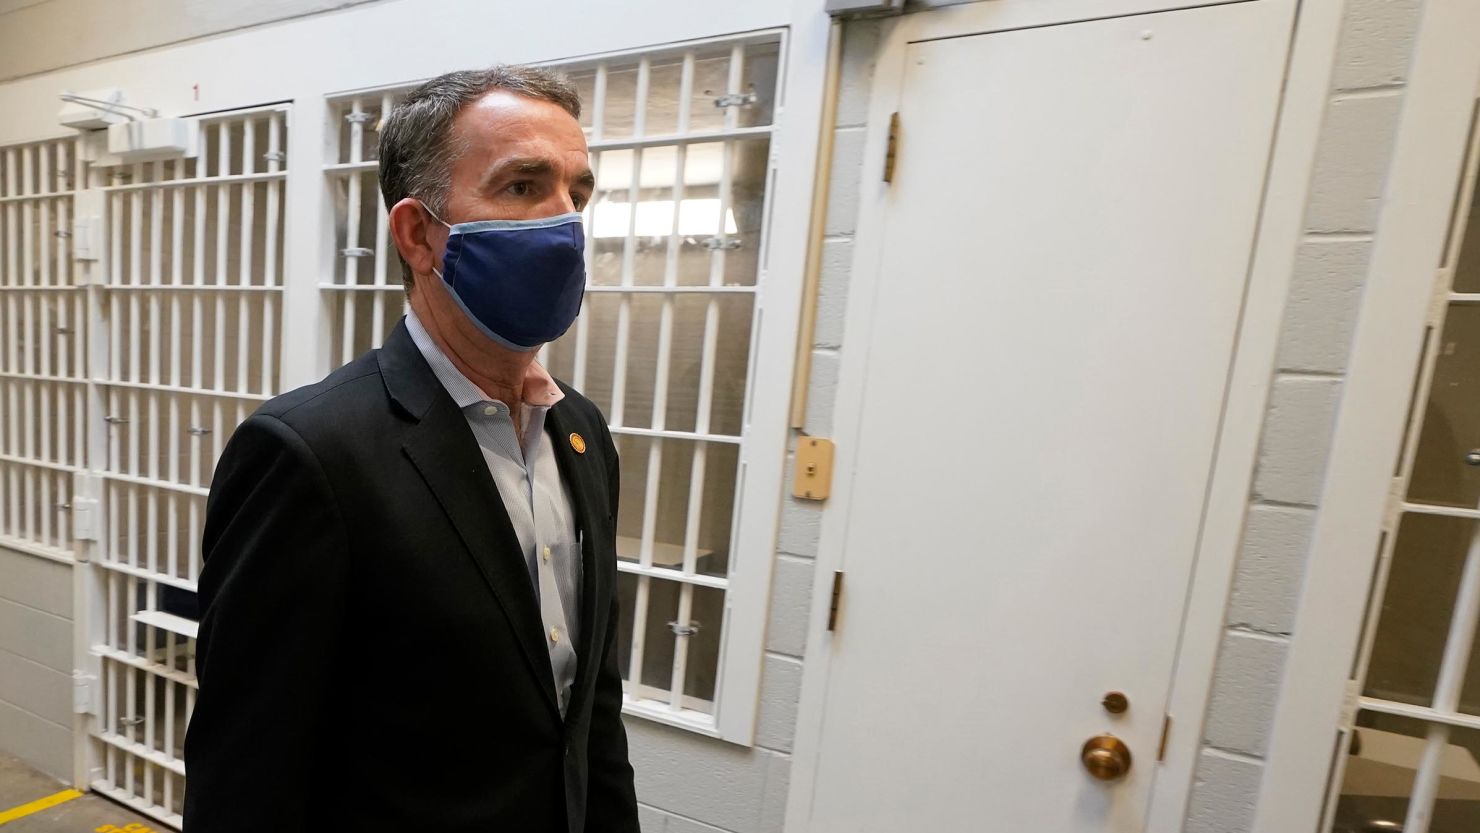 Gov. Ralph Northam walks past the holding cells next to the death chamber during a tour at the Greensville Correctional Center prior to signing a bill abolishing the state's death penalty in Jarratt, Virginia, on Wednesday, March 24. 